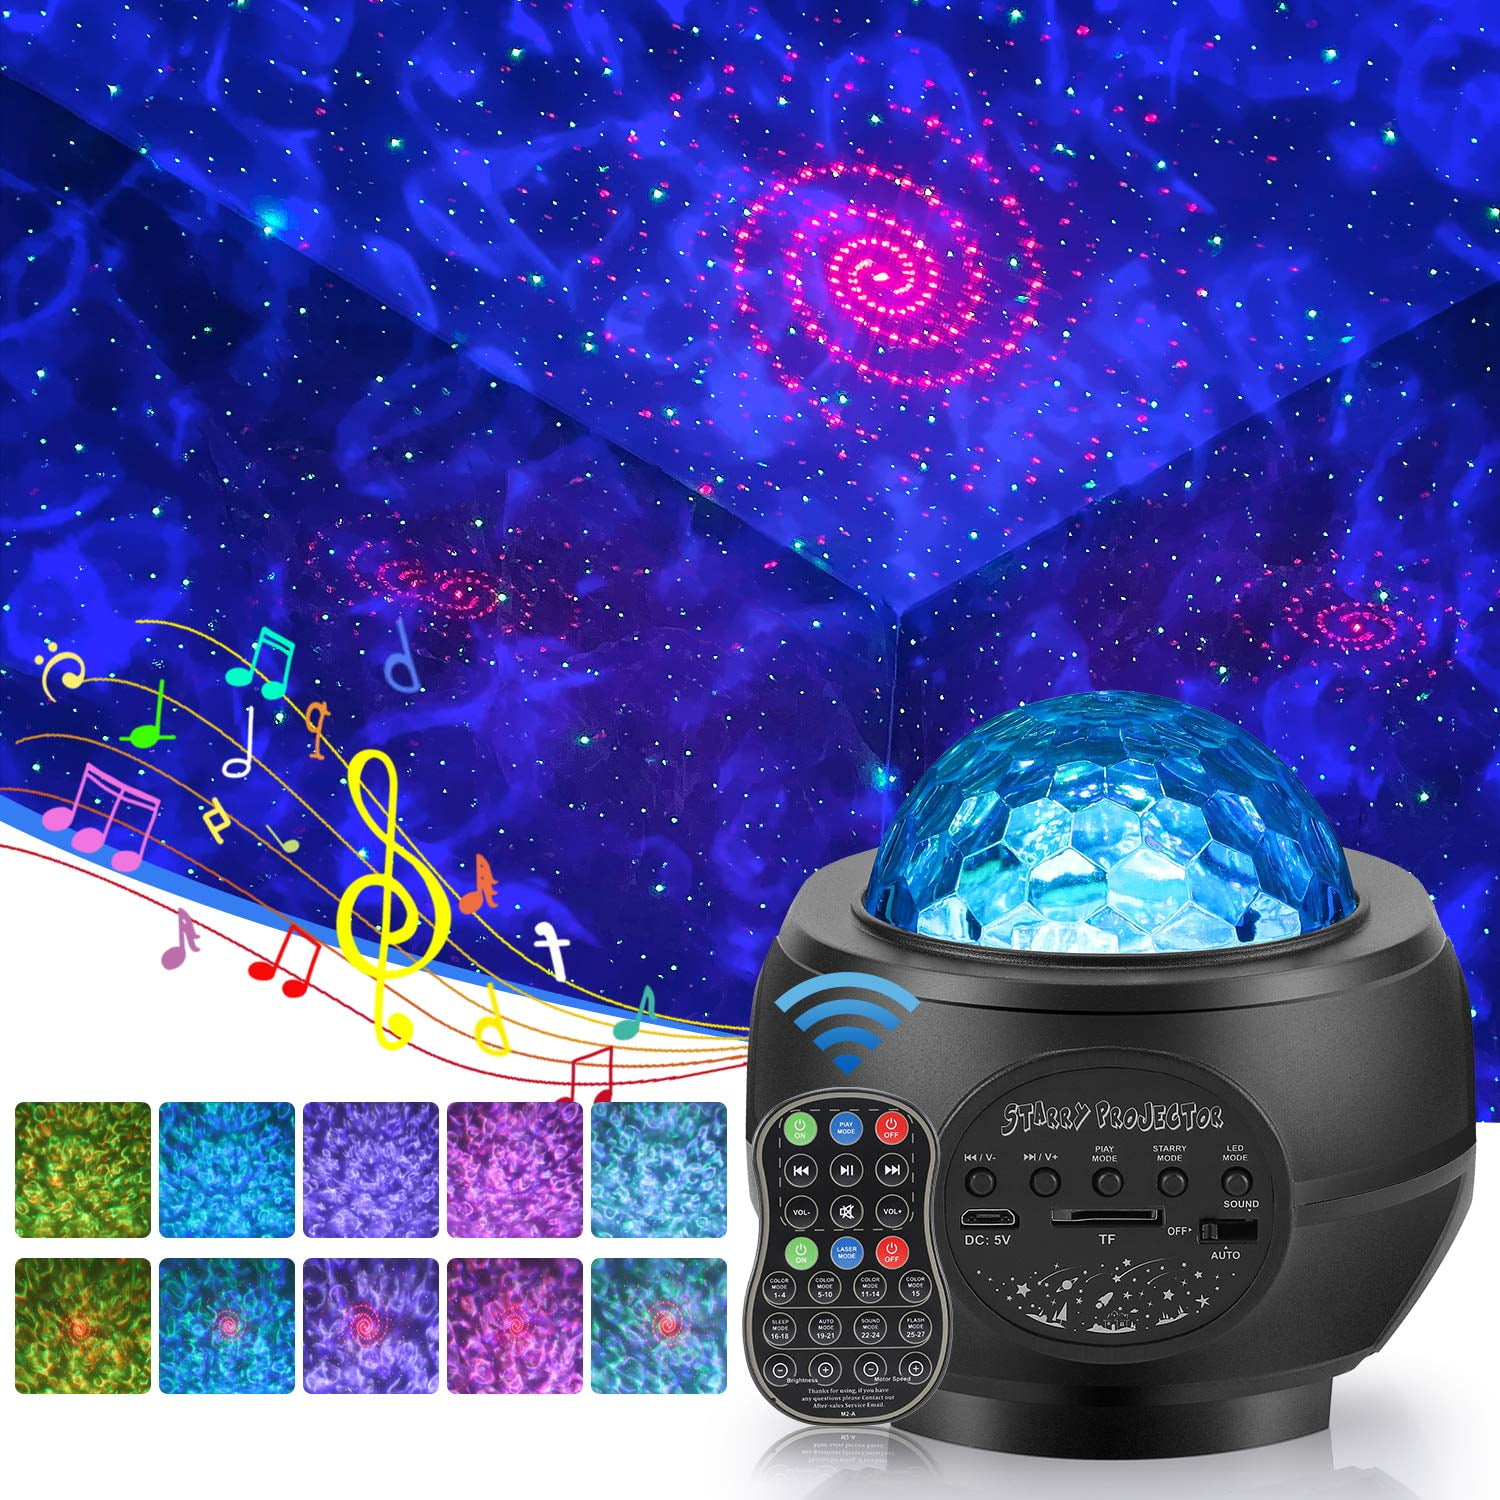 3 in 1 LED Star Projector Light Ocean Wave Star Galaxy Night Lamp Color Change 